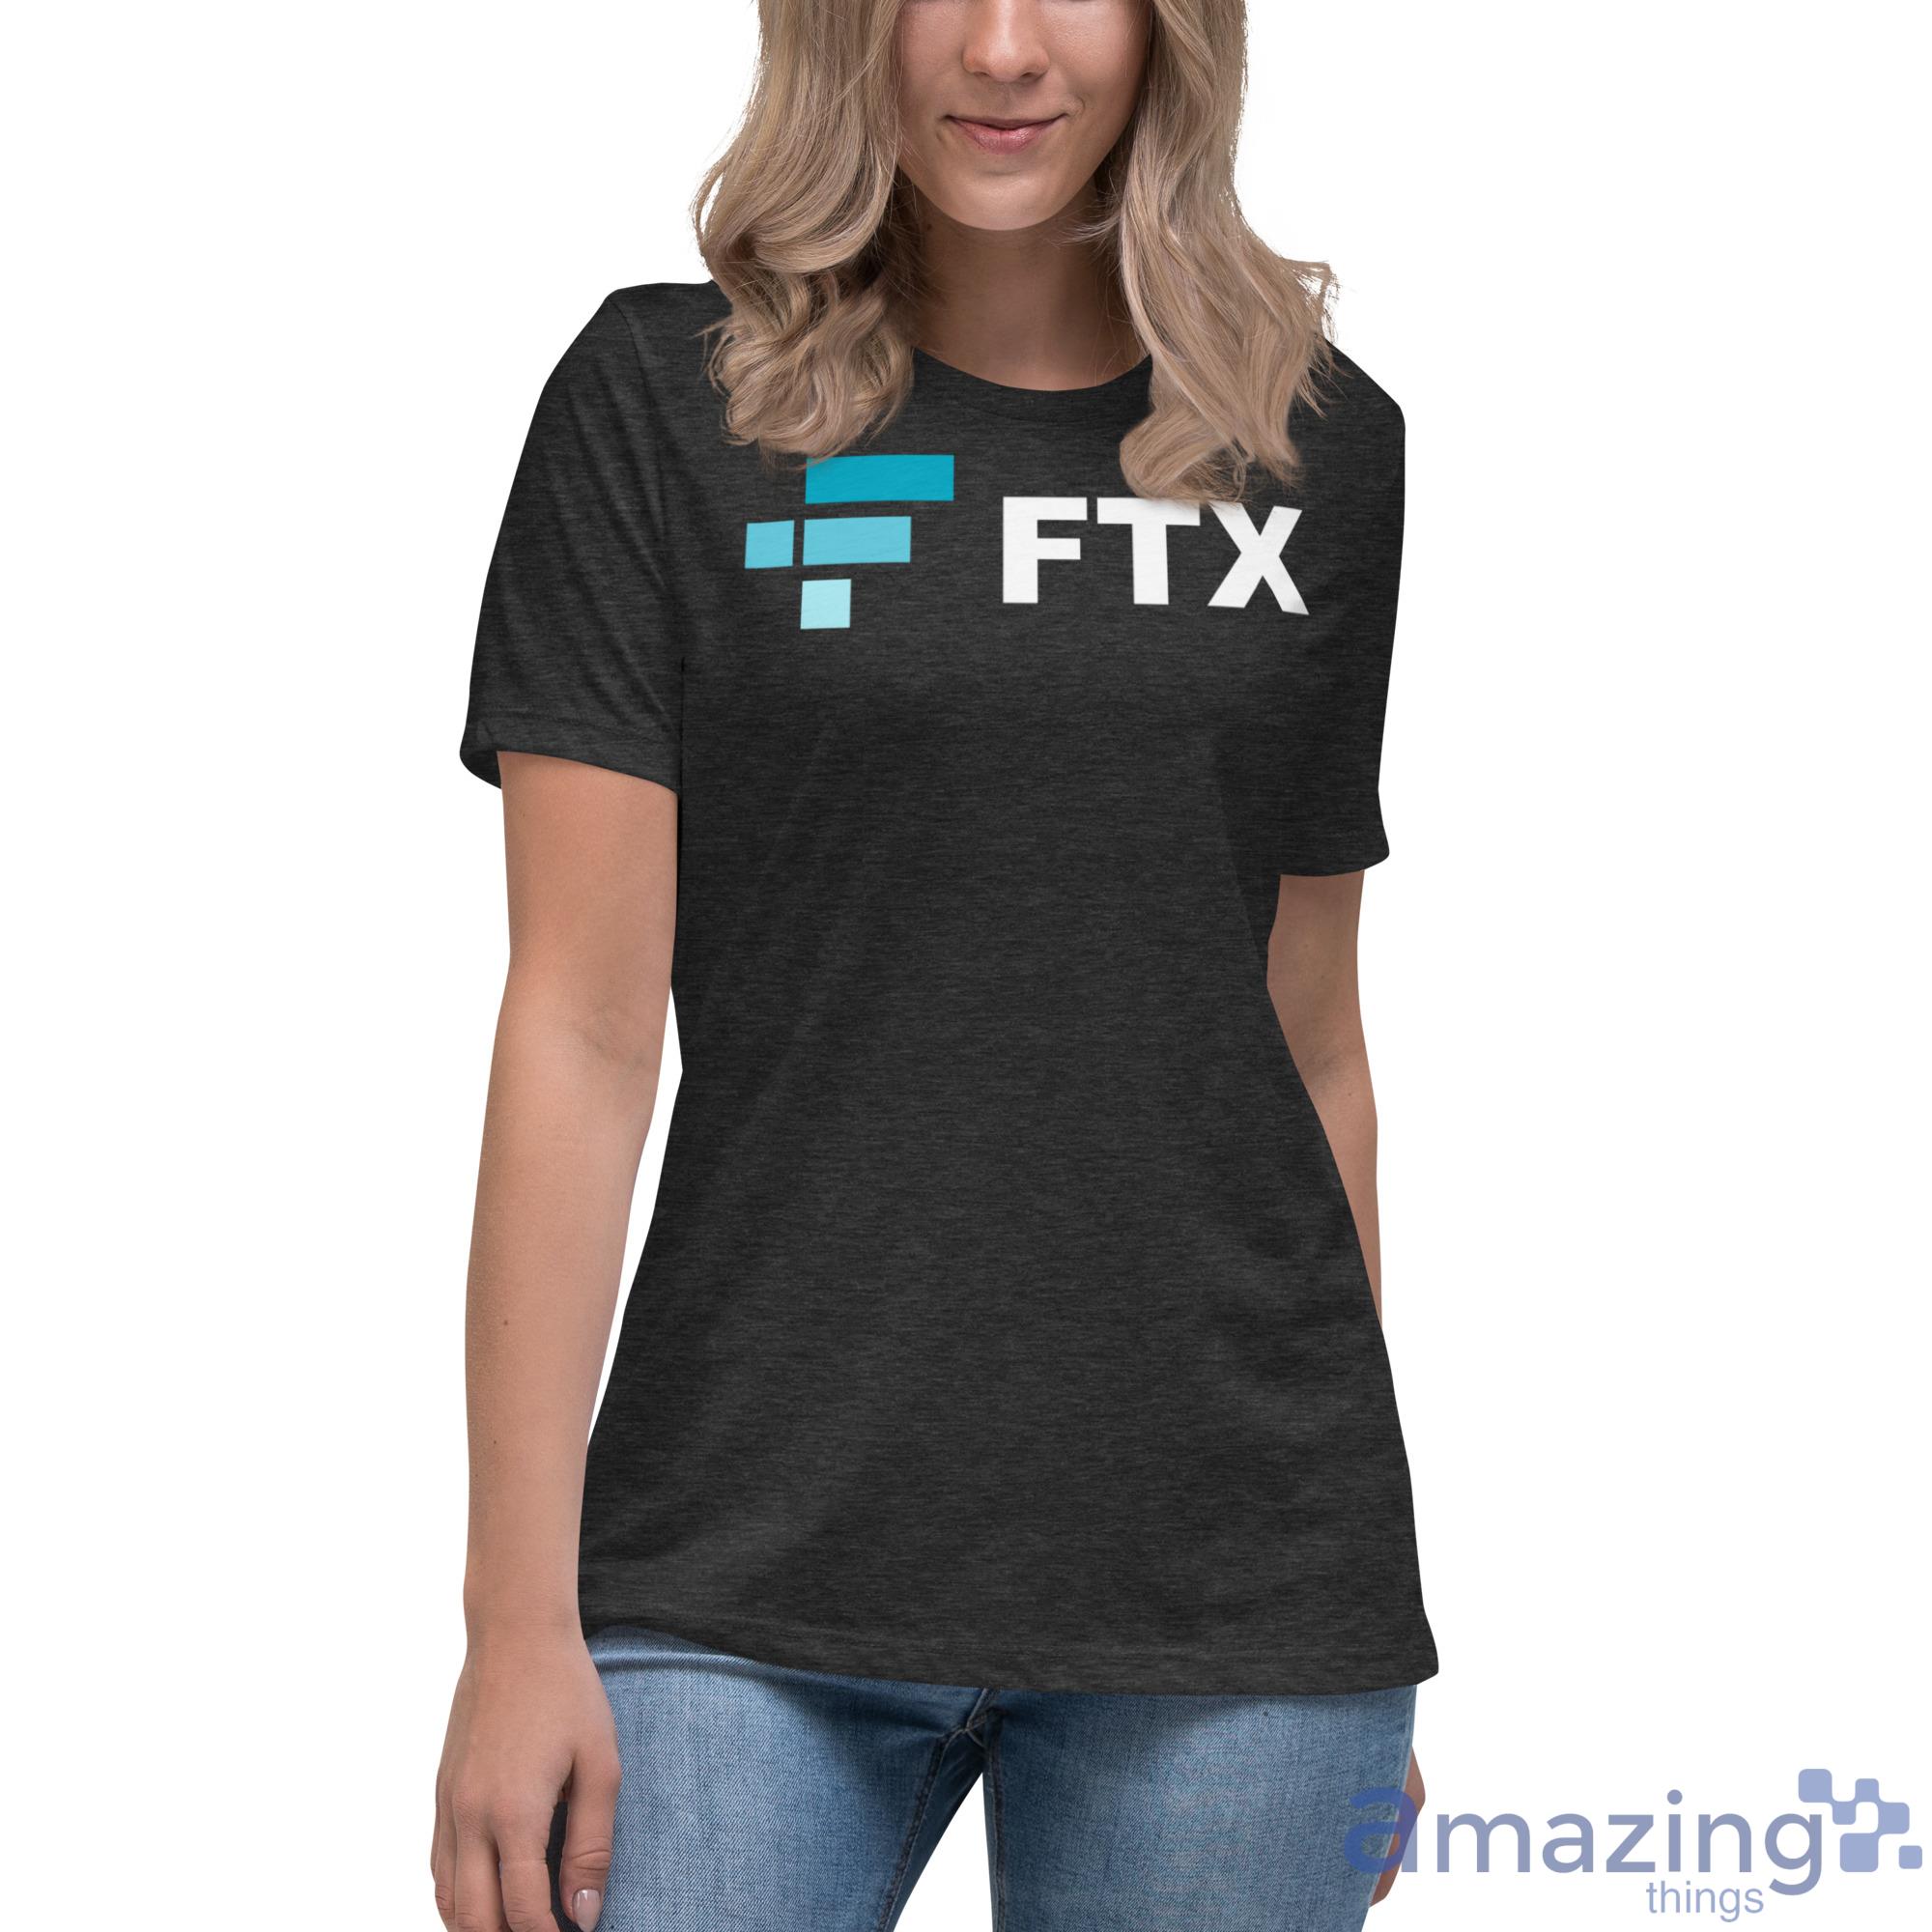 What Is Ftx On Umpire Shirt